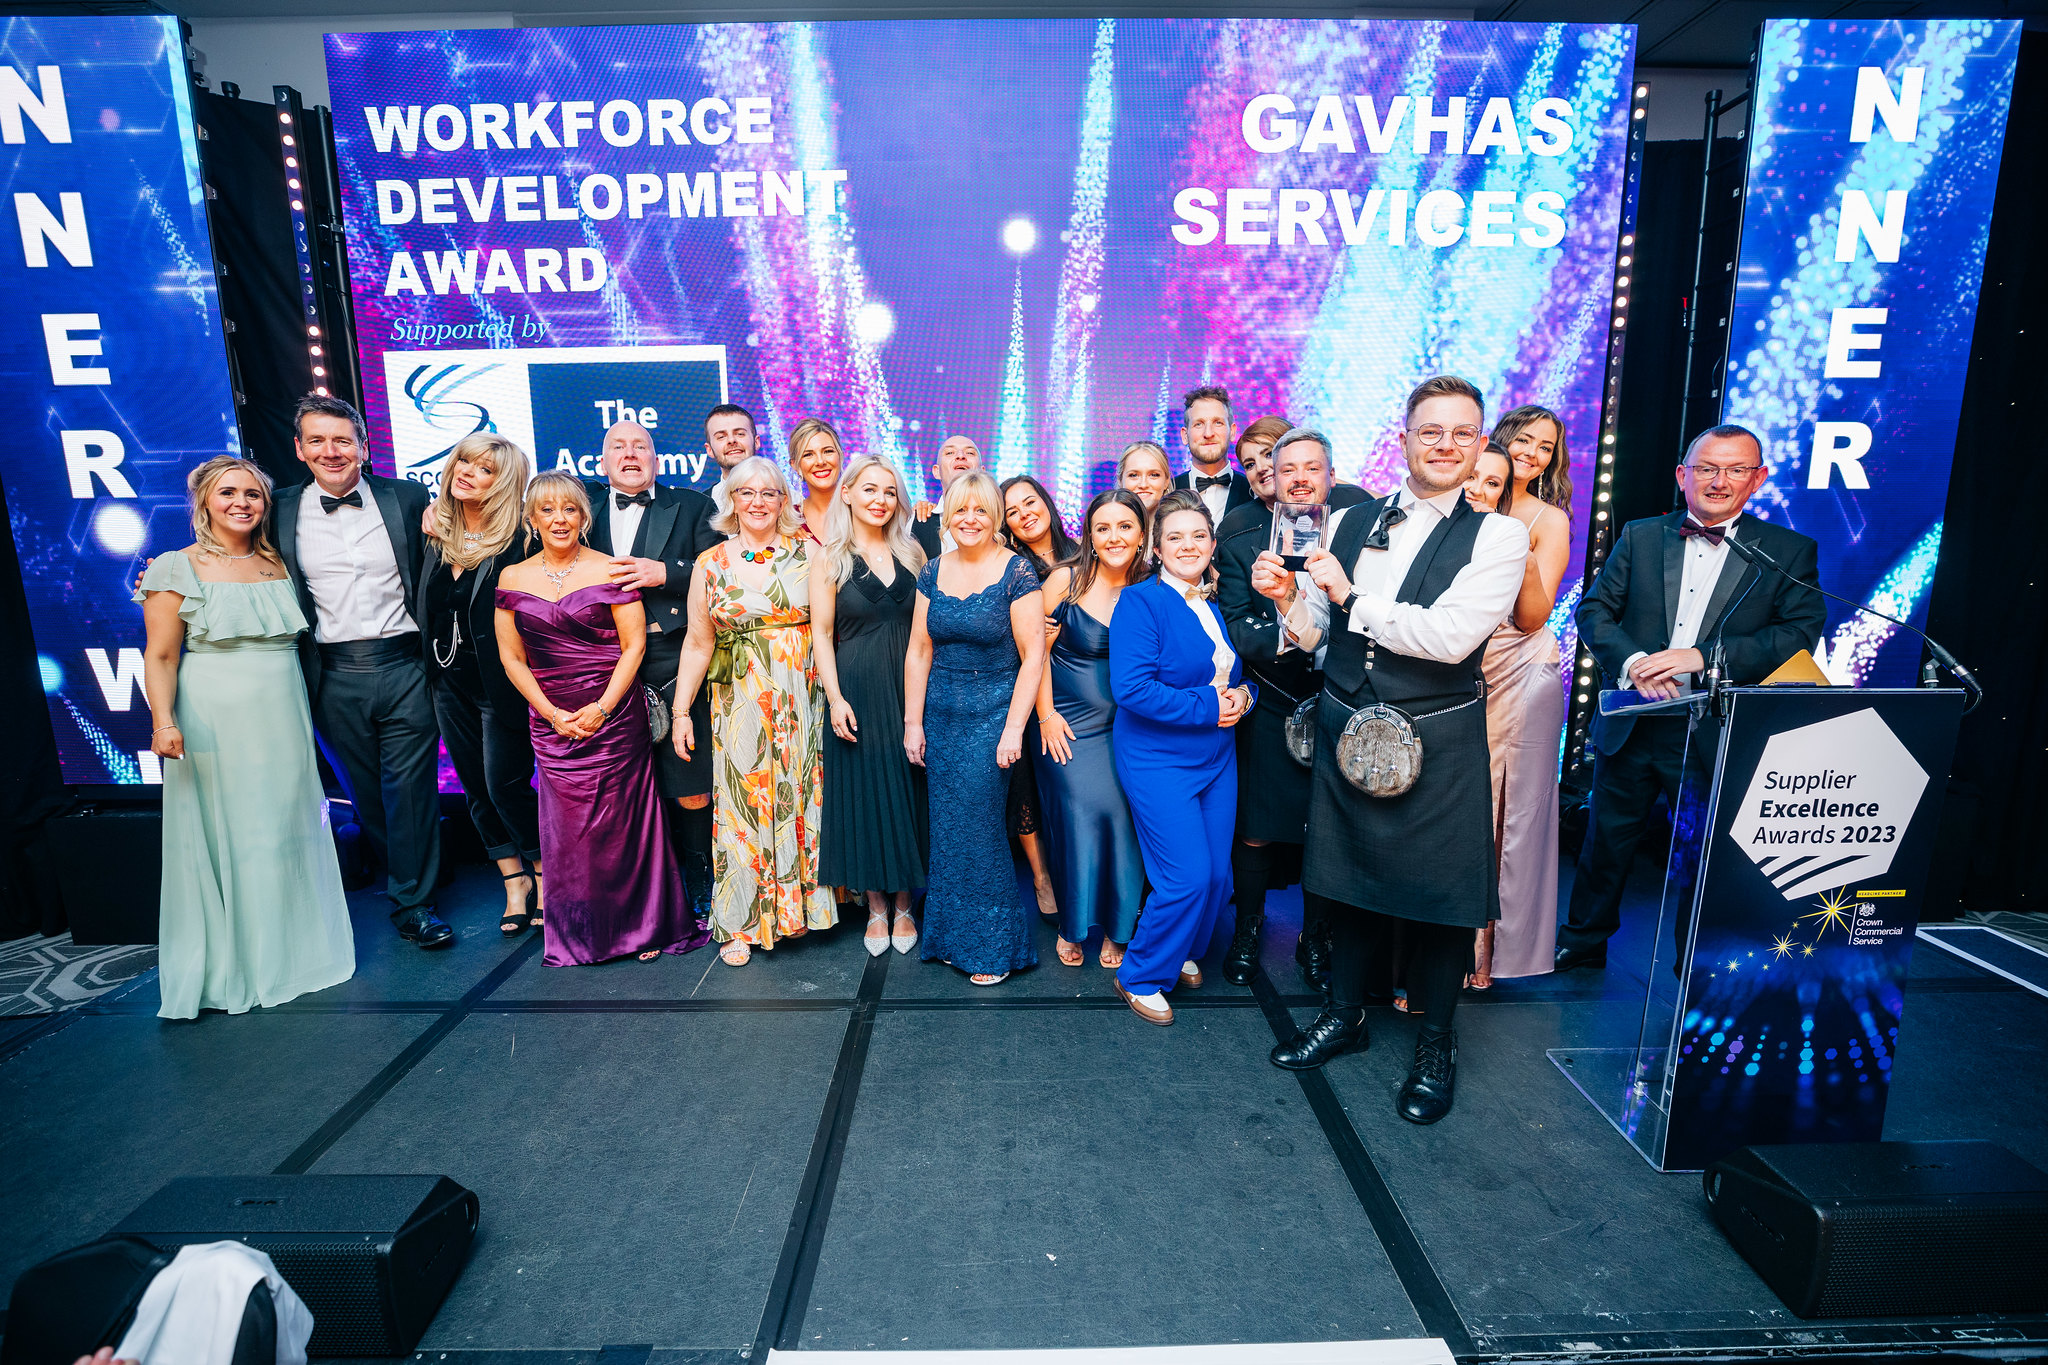 Suppliers take centre stage at Scotland Excel awards